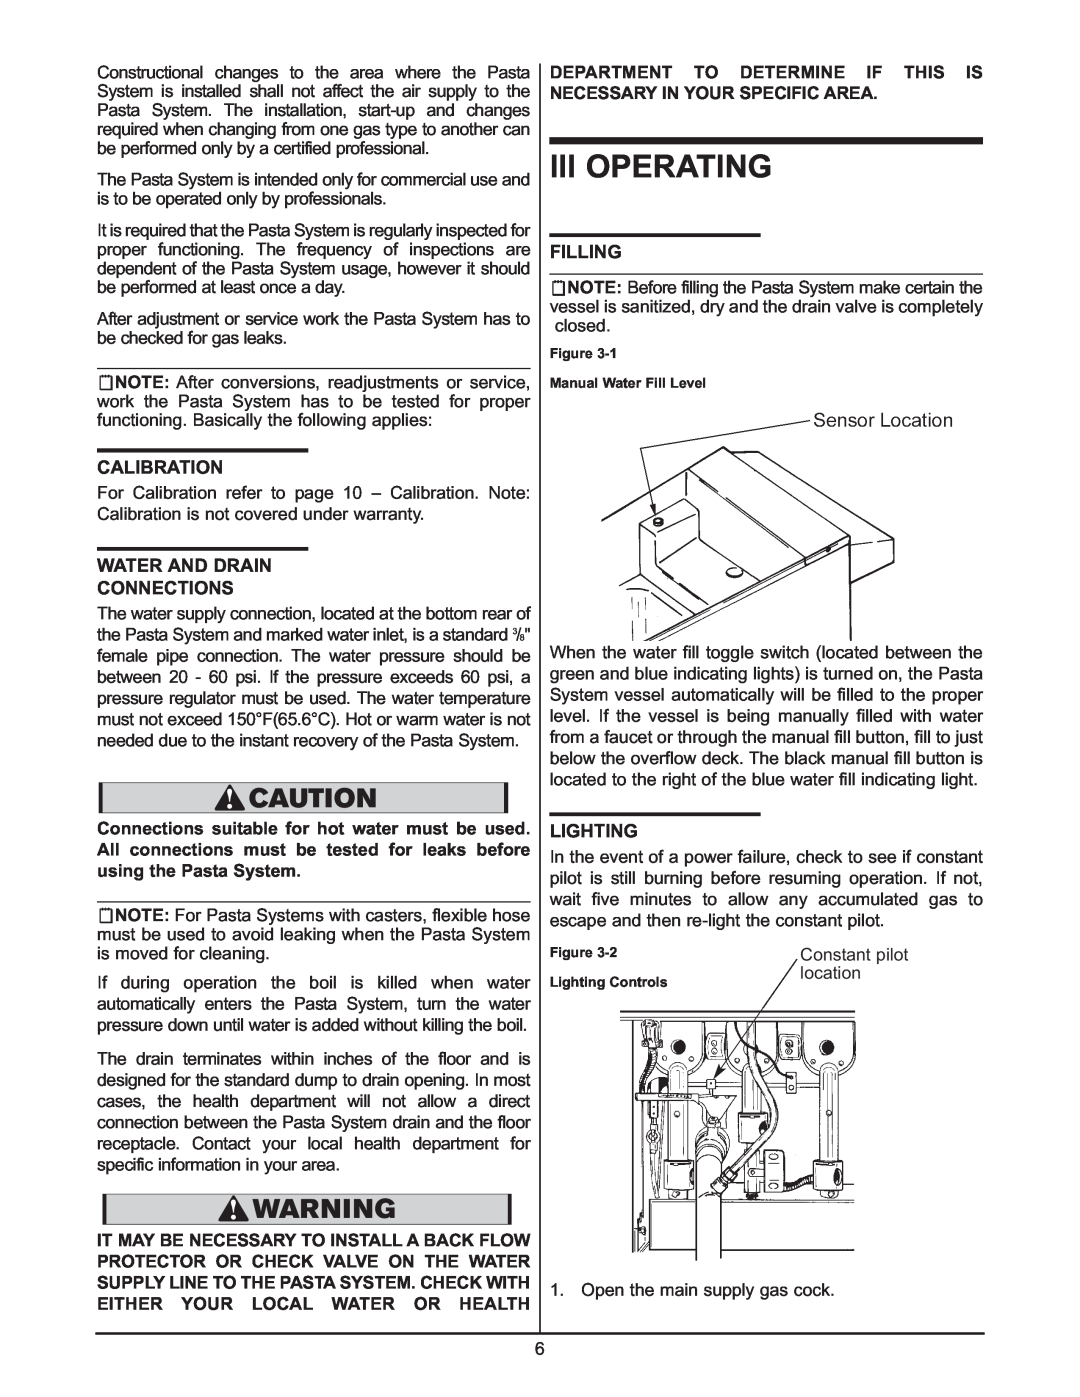 Keating Of Chicago 0107 service manual Iii Operating, Calibration, Water And Drain Connections, Filling, Lighting 